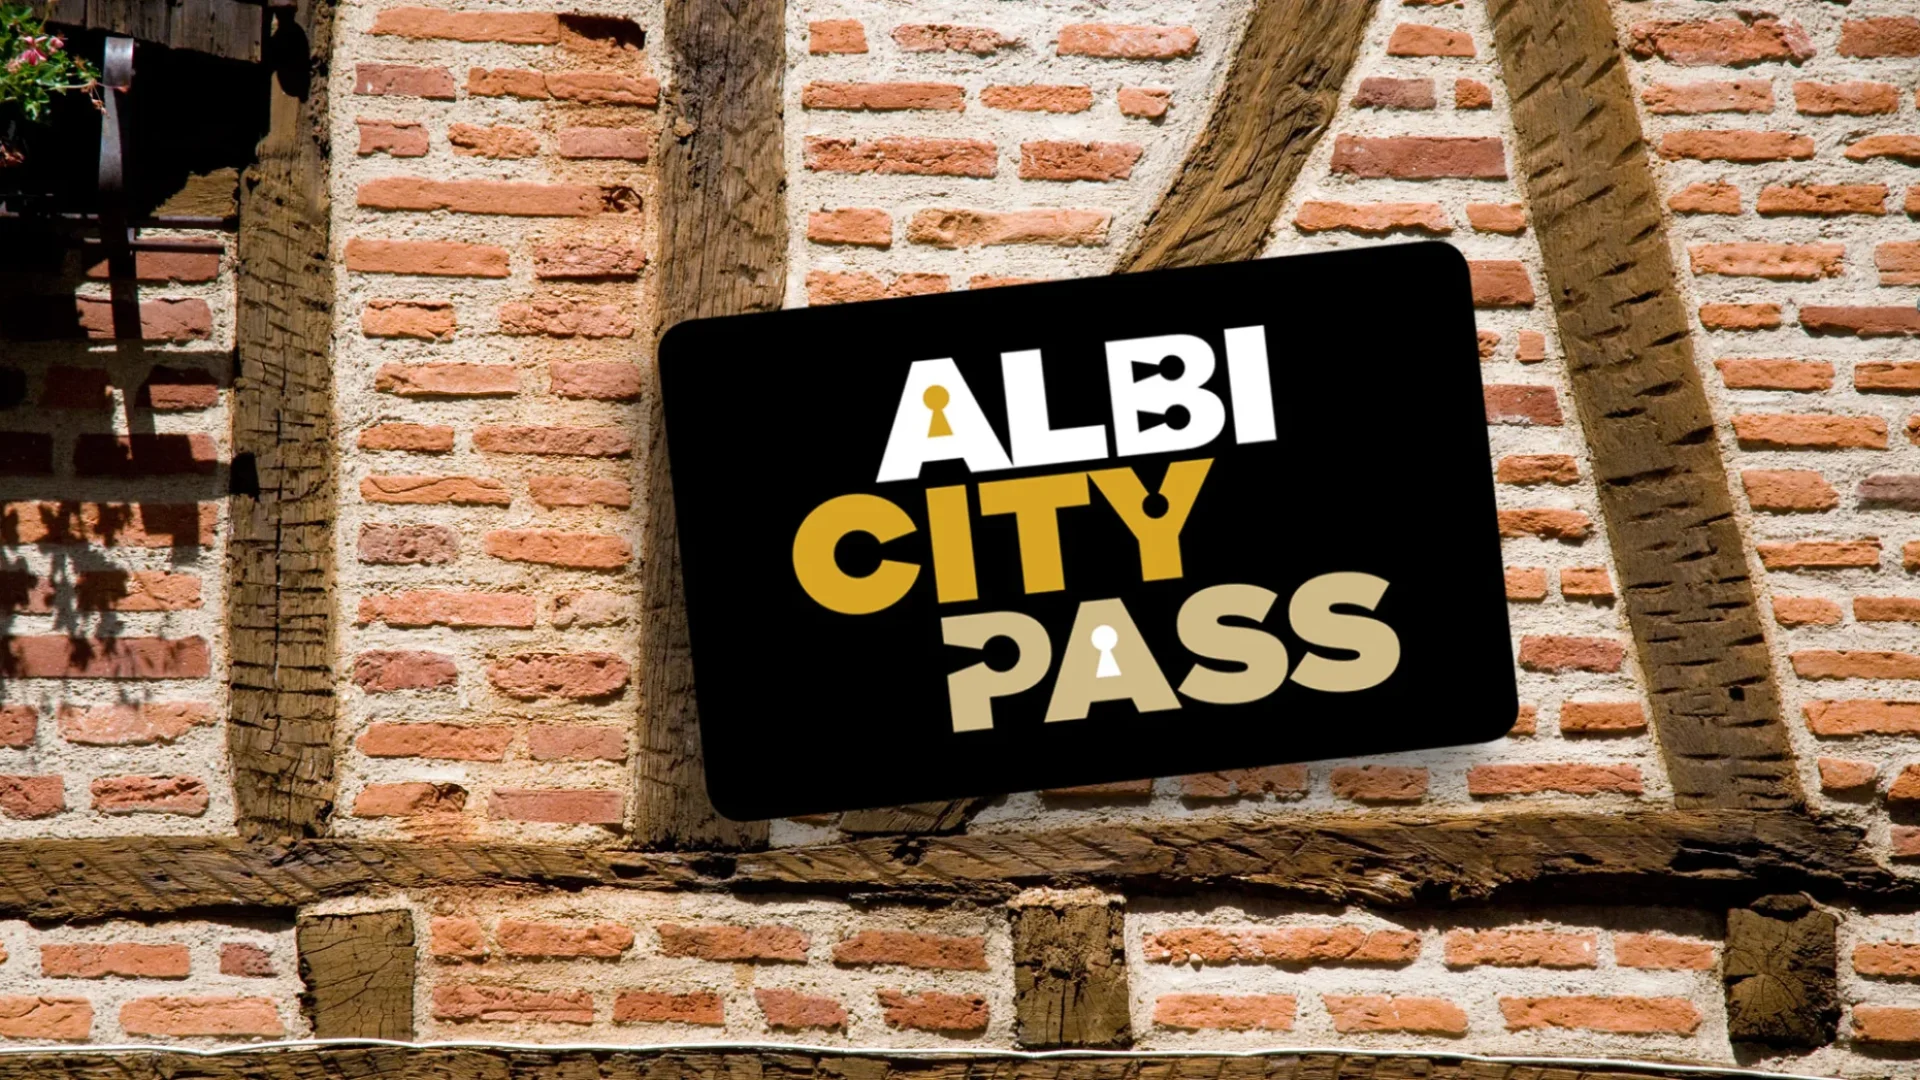 Albi city pass; the tourist pass essential for the visit